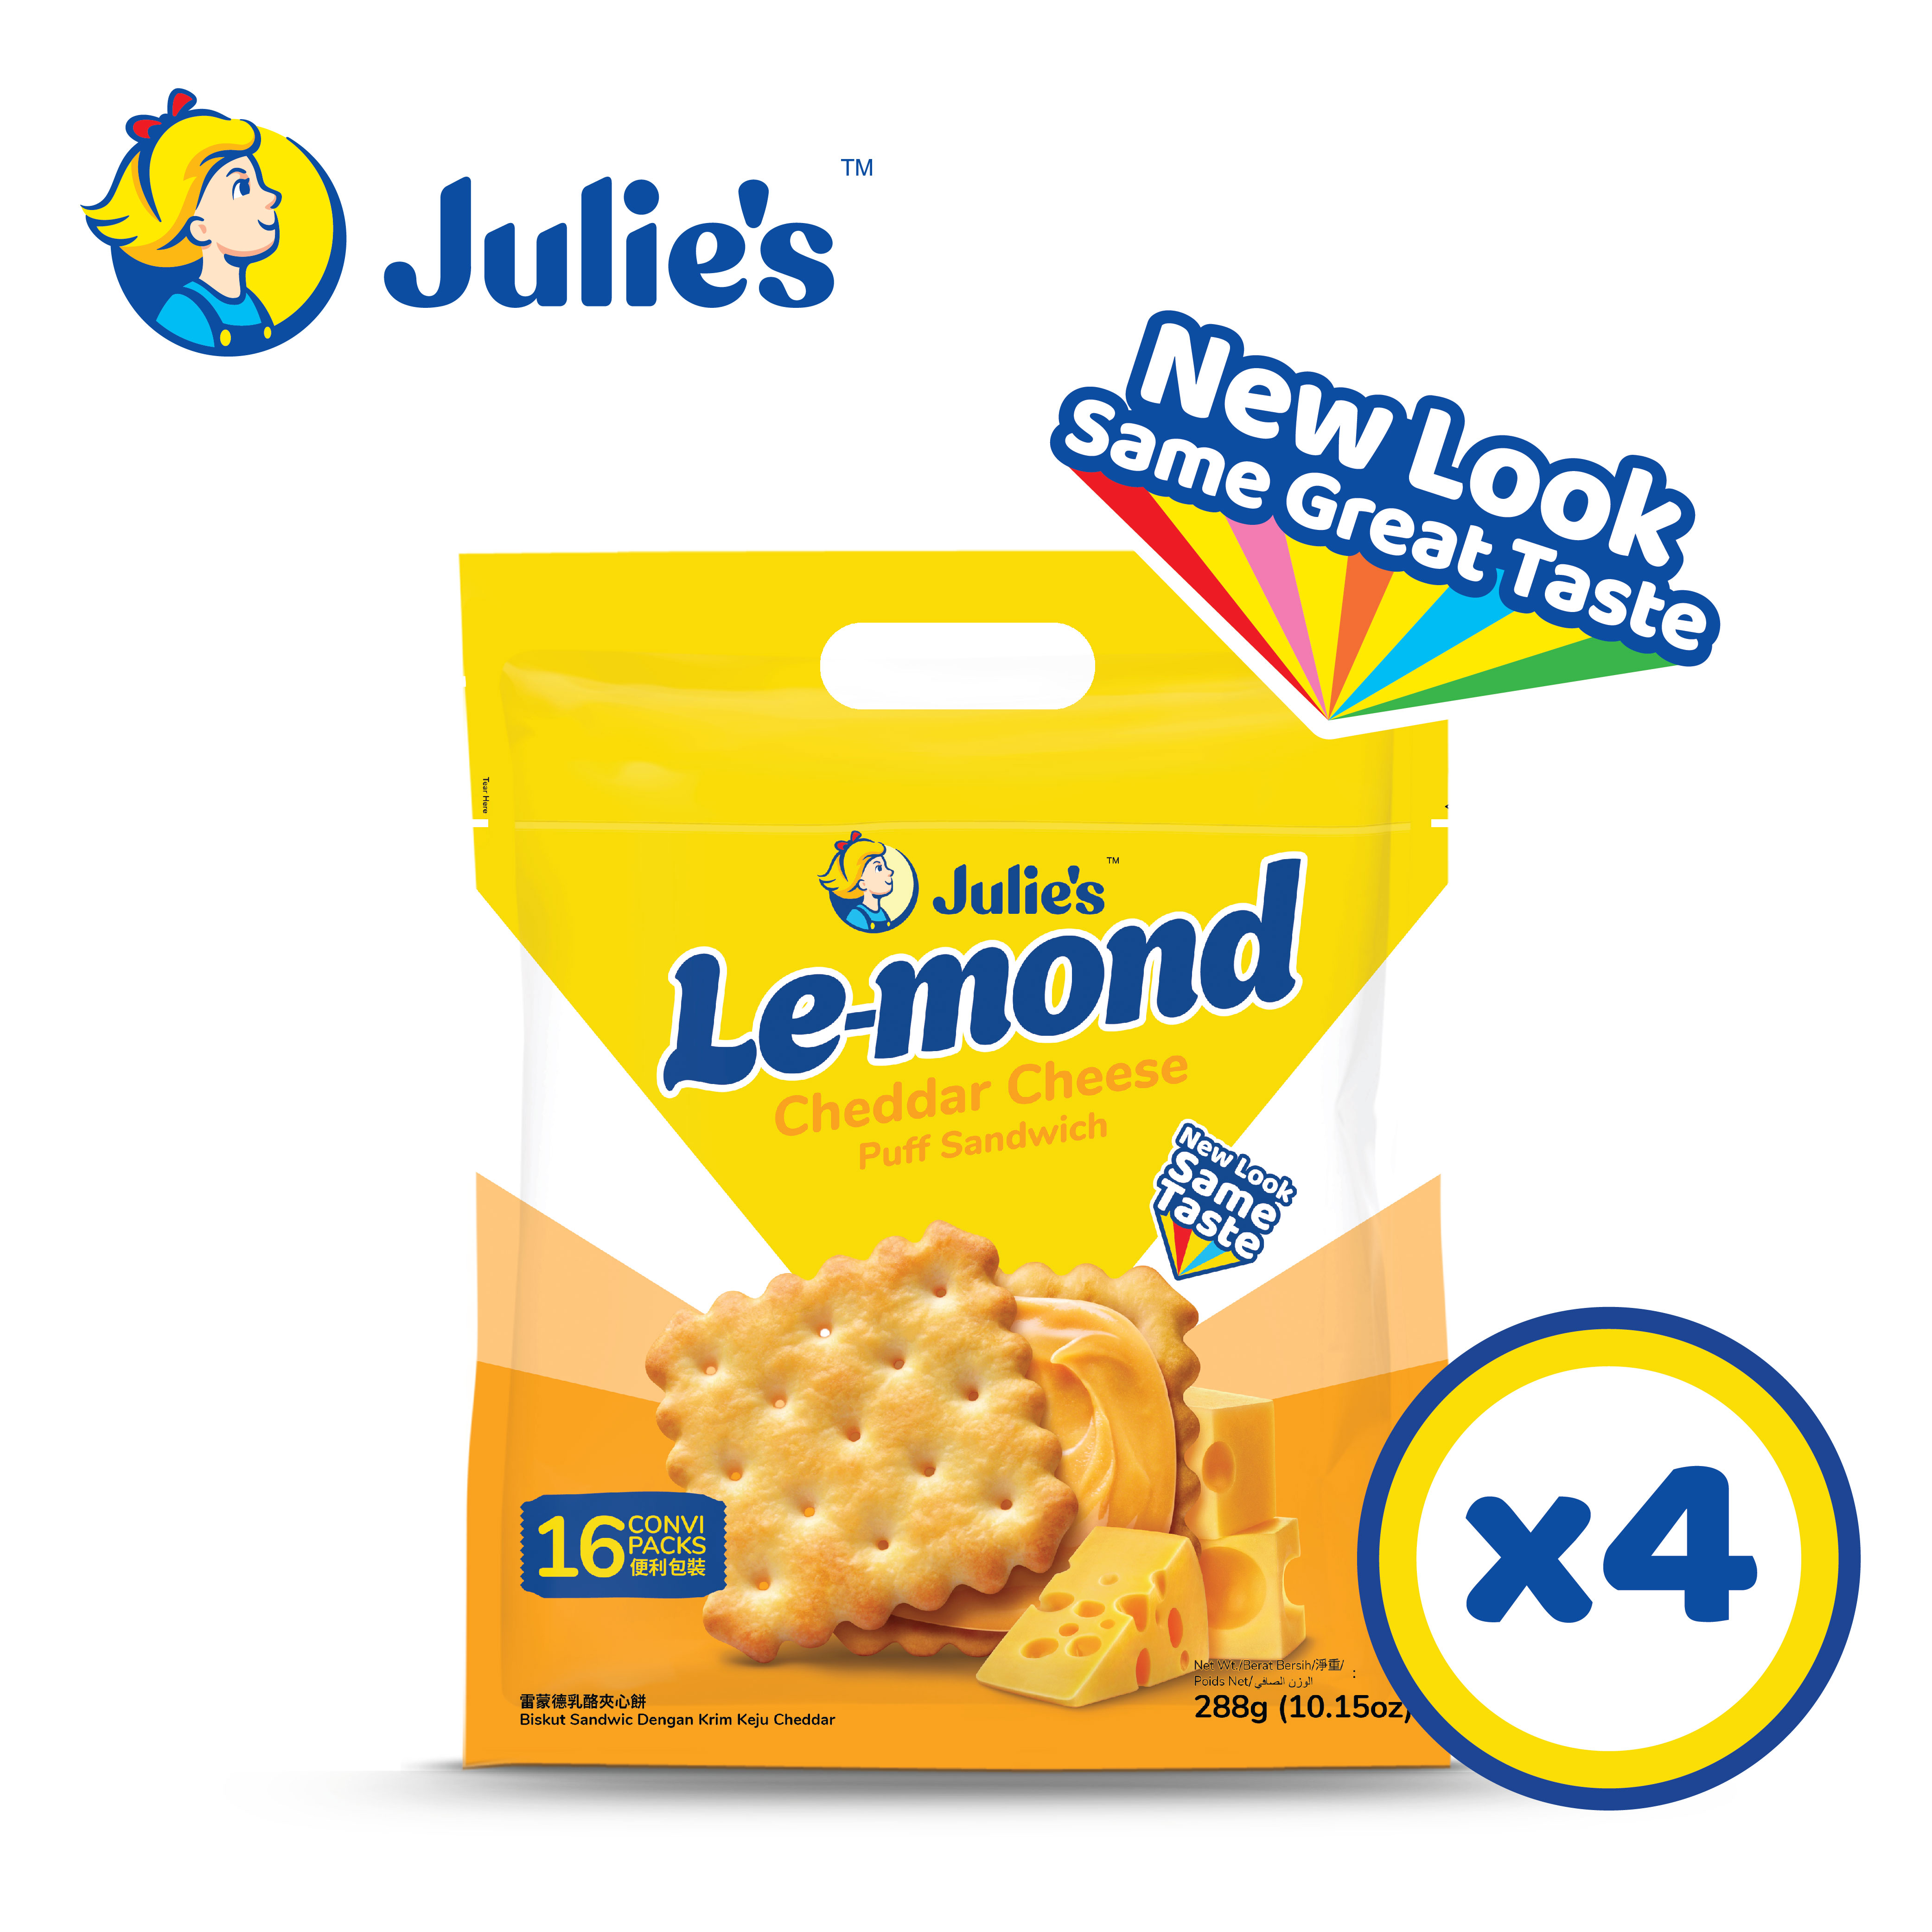 Julie's Le-mond Cheddar Cheese 288g x 4 pack